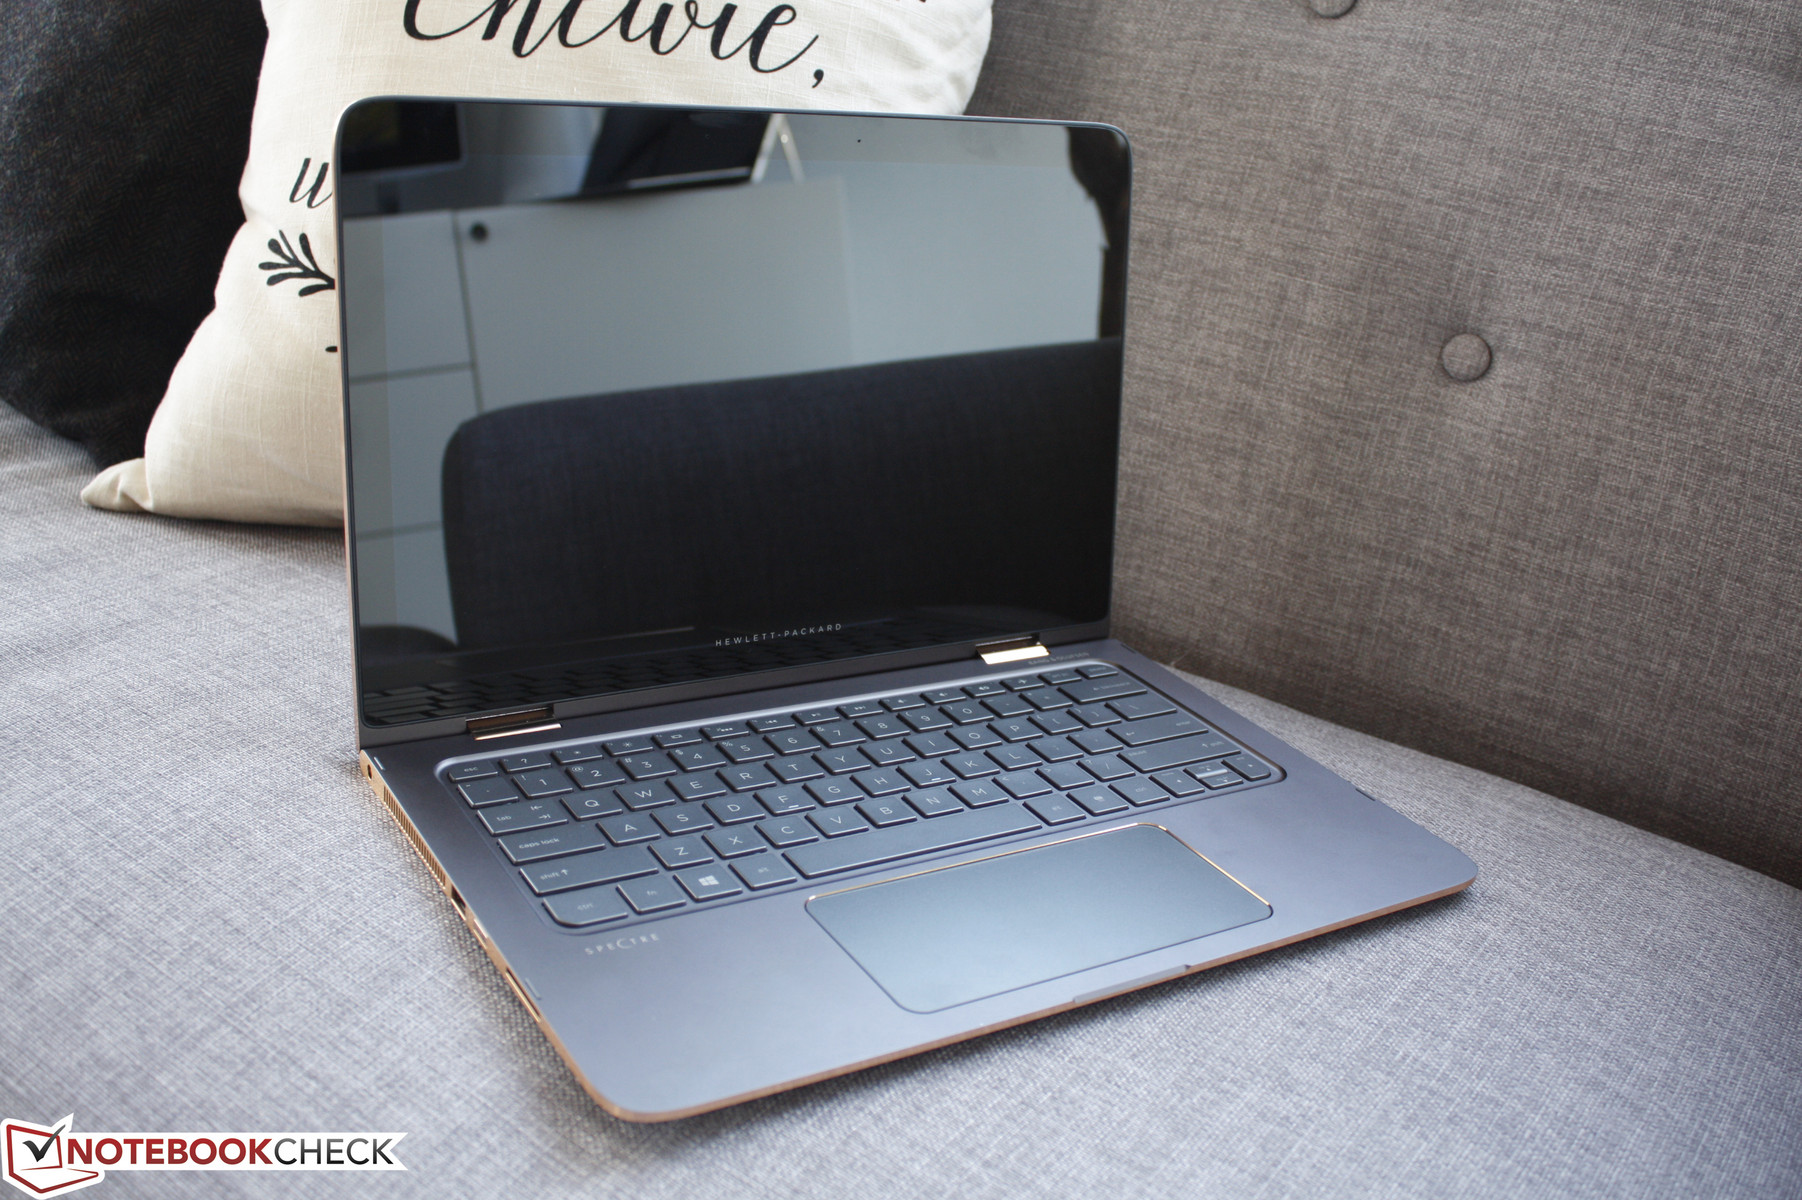 HP Spectre x360 gets new Silver and Copper colors